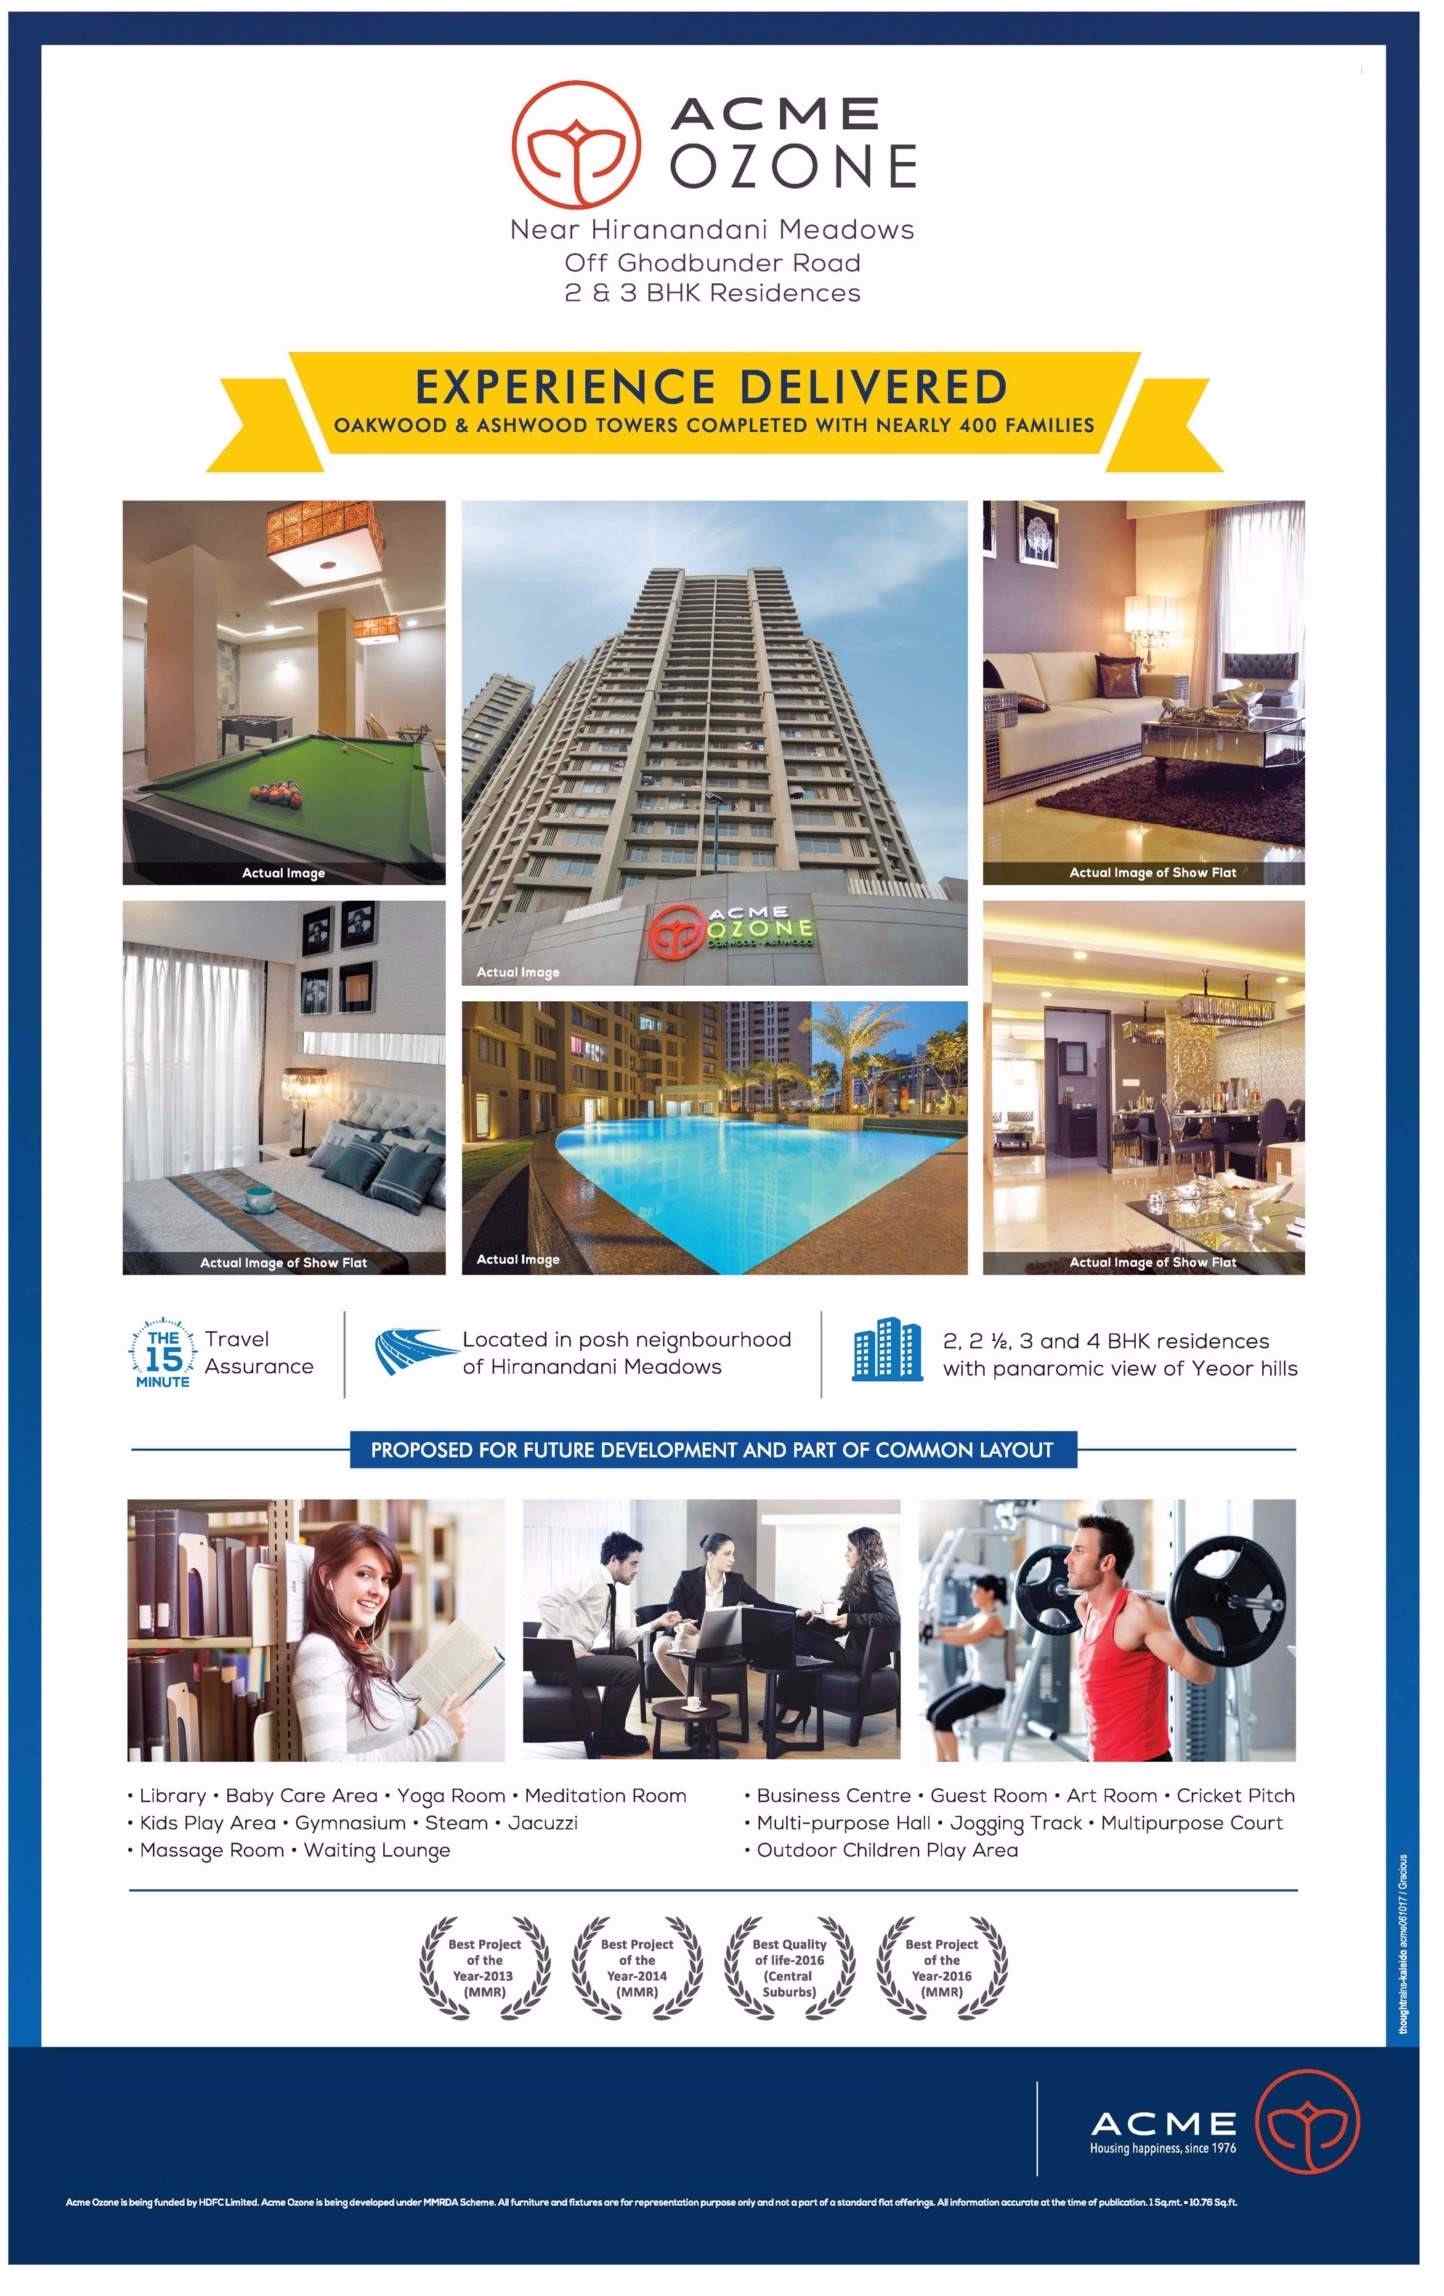 Experience delivered Oakwood and Ashwood Towers completed with nearly 400 families while purchasing Acme Ozone in Mumbai